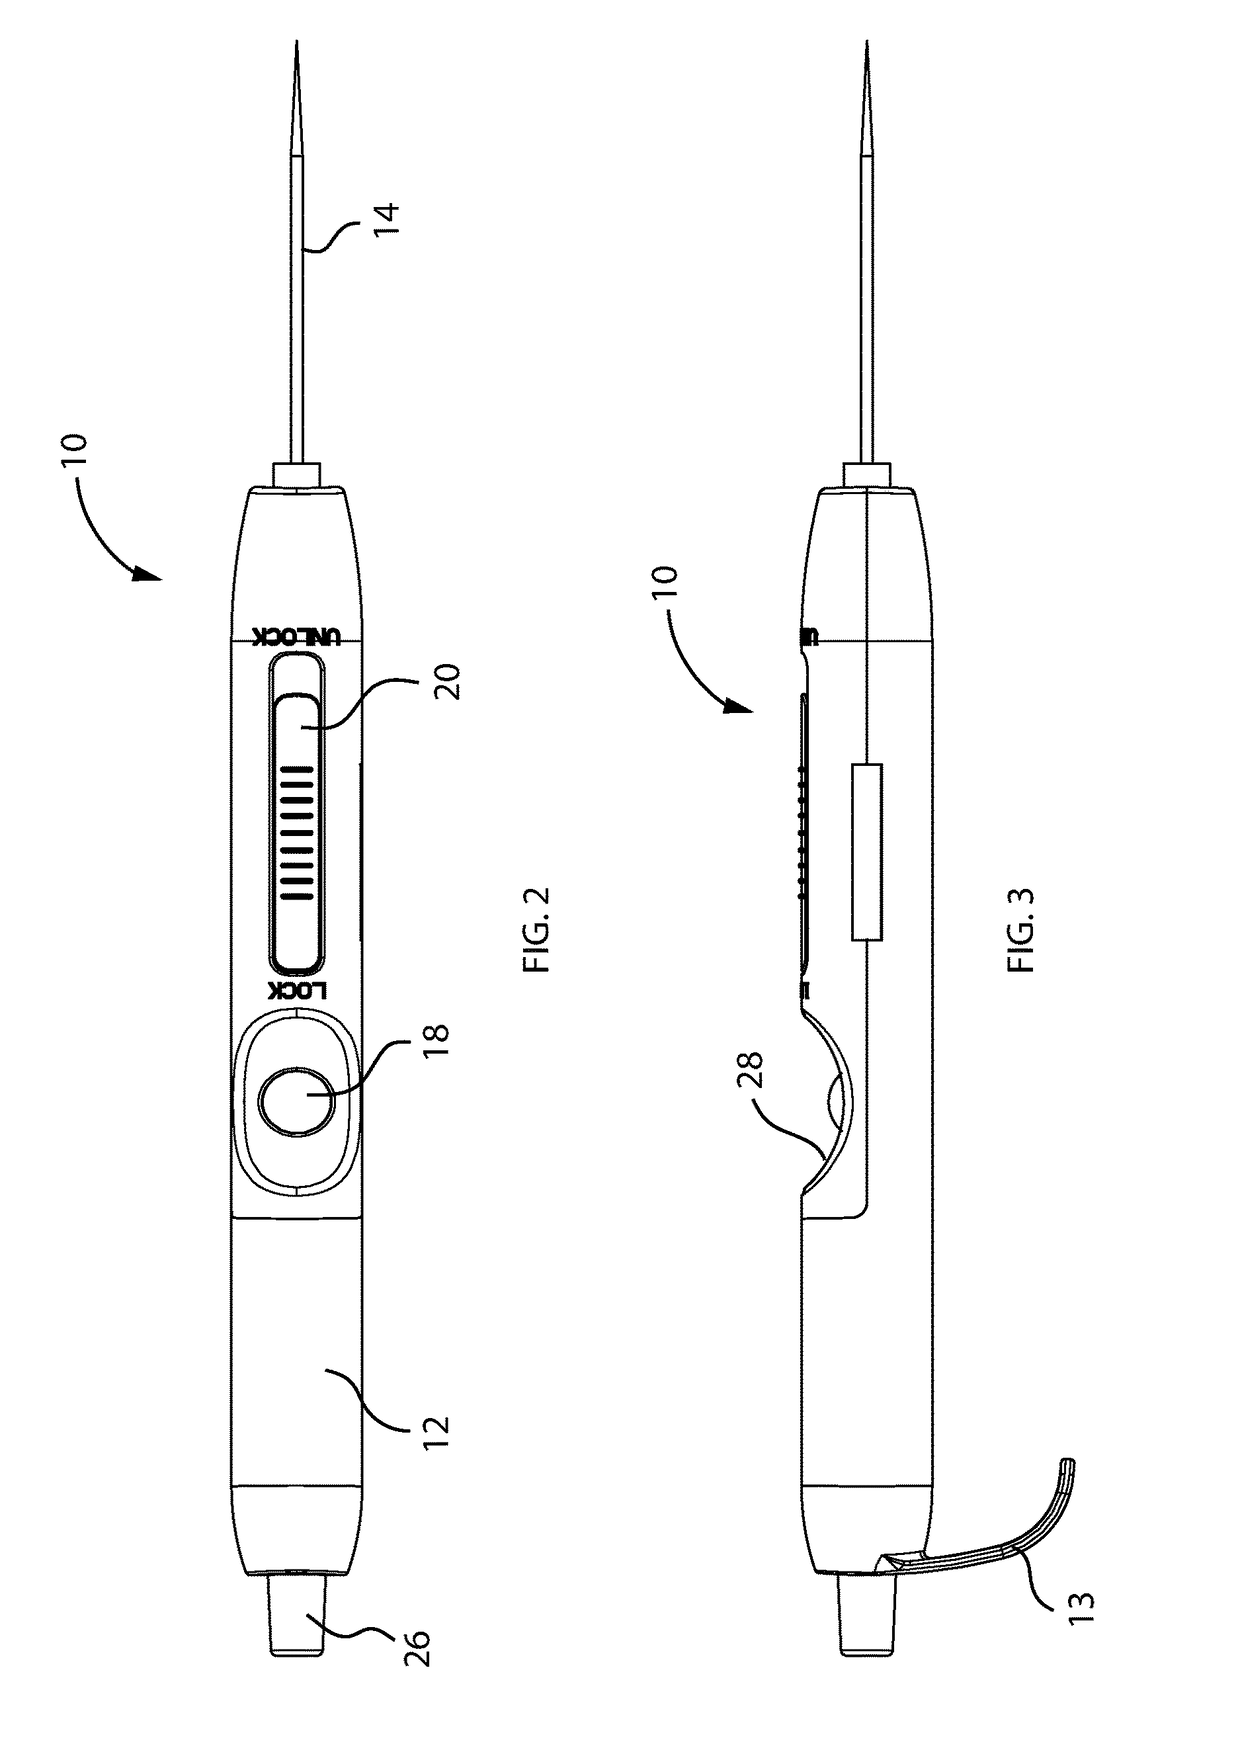 Multi-actuated micro-pipette controller and associated use thereof